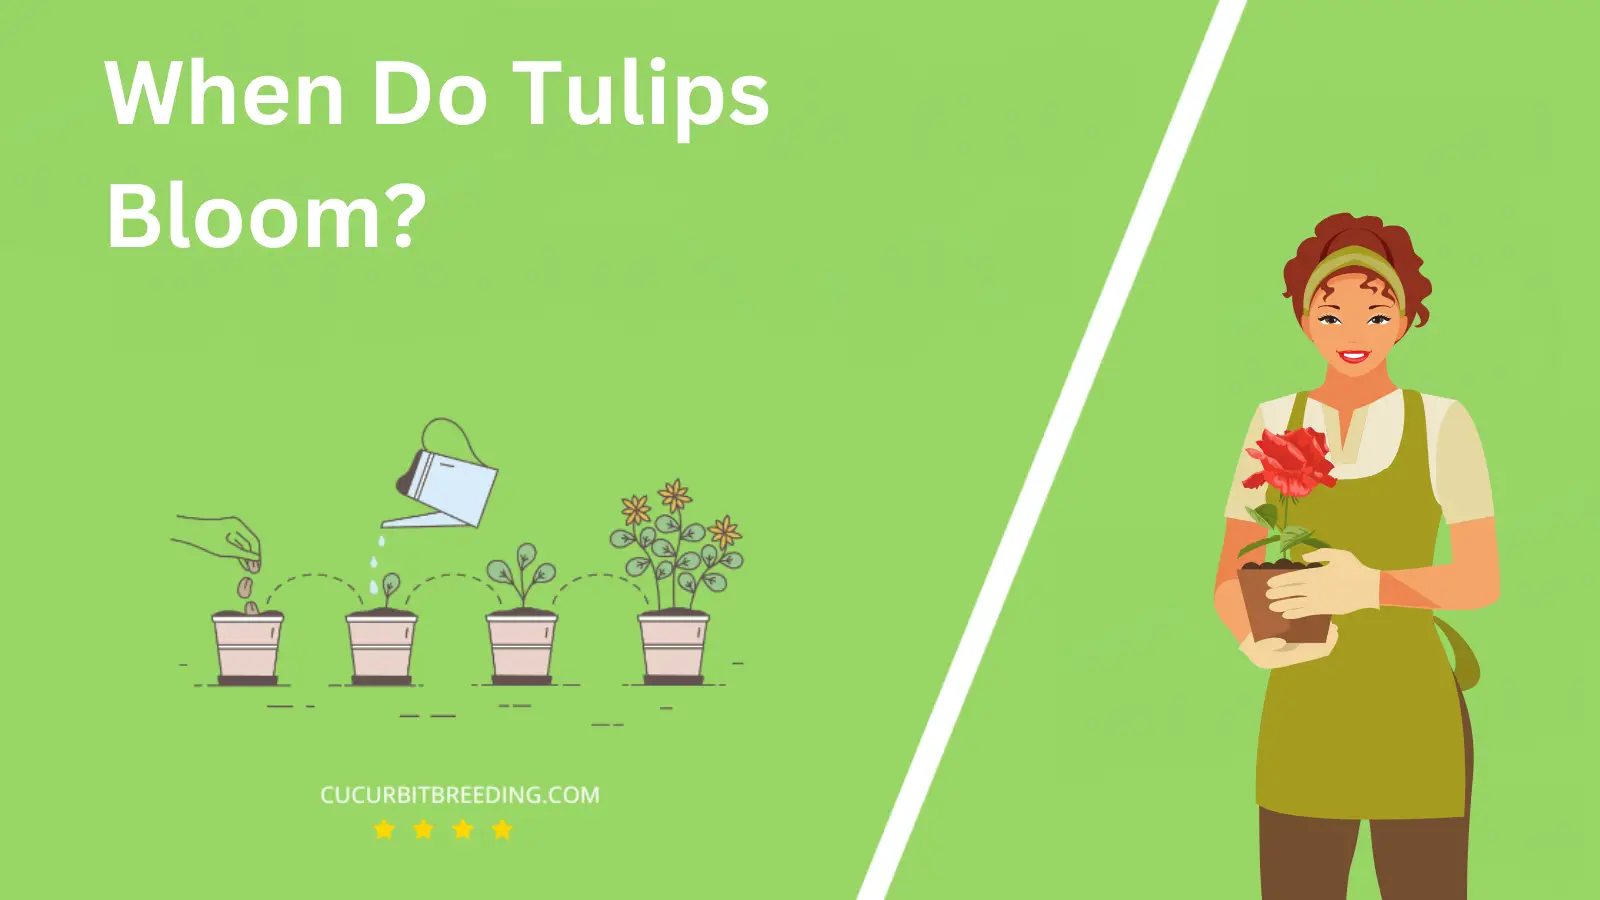 When Do Tulips Bloom?